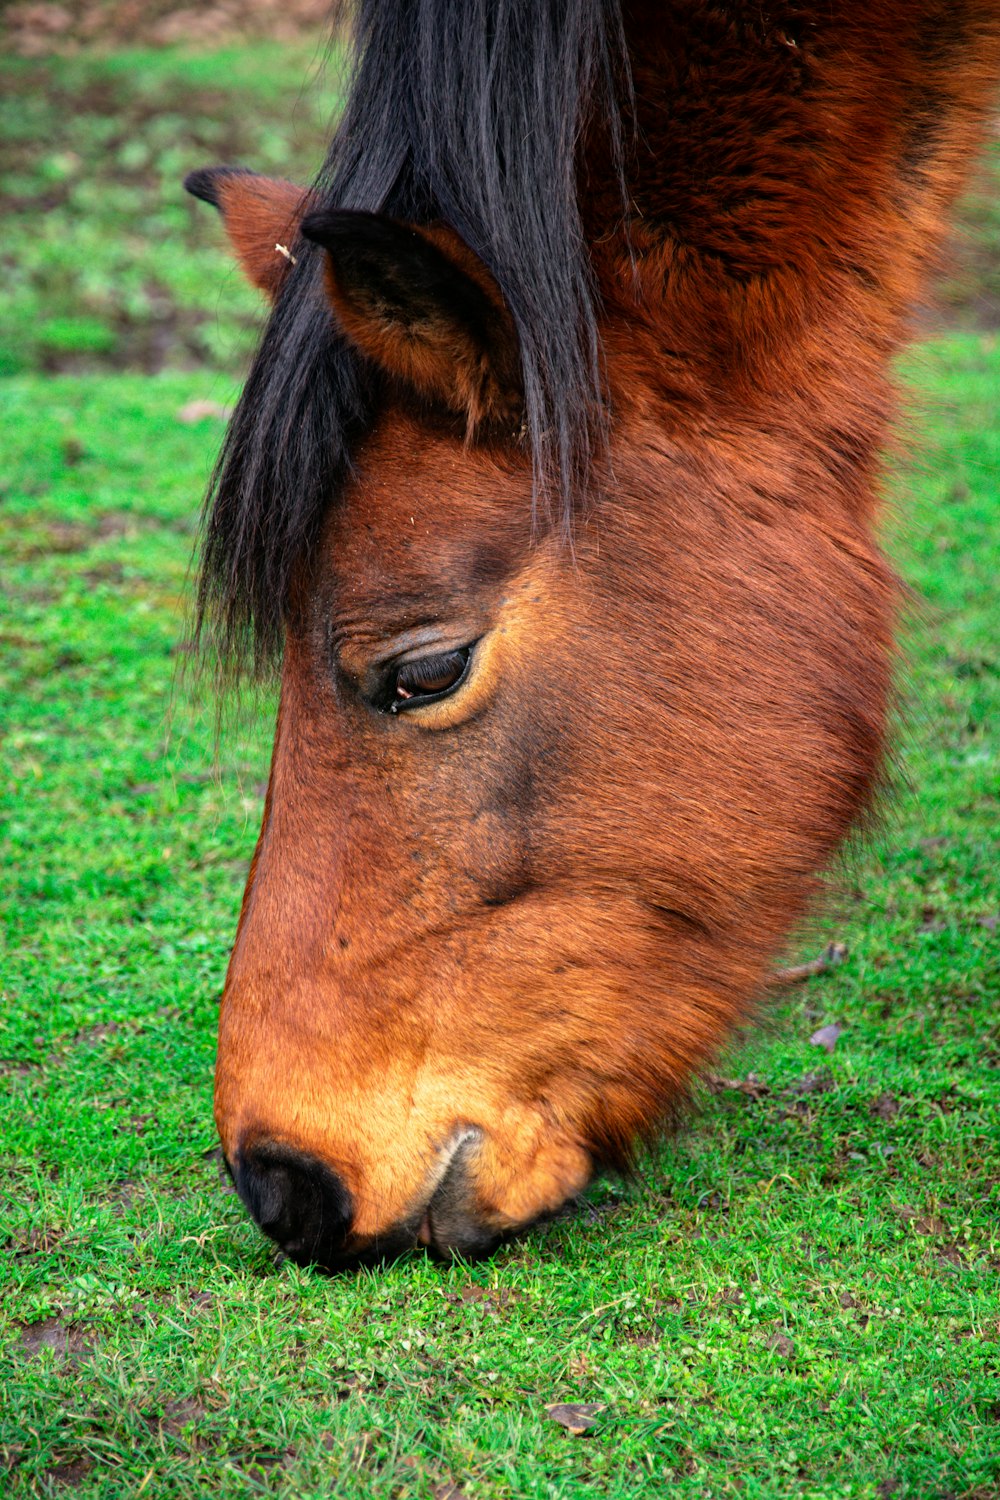 a close up of a horse grazing on grass